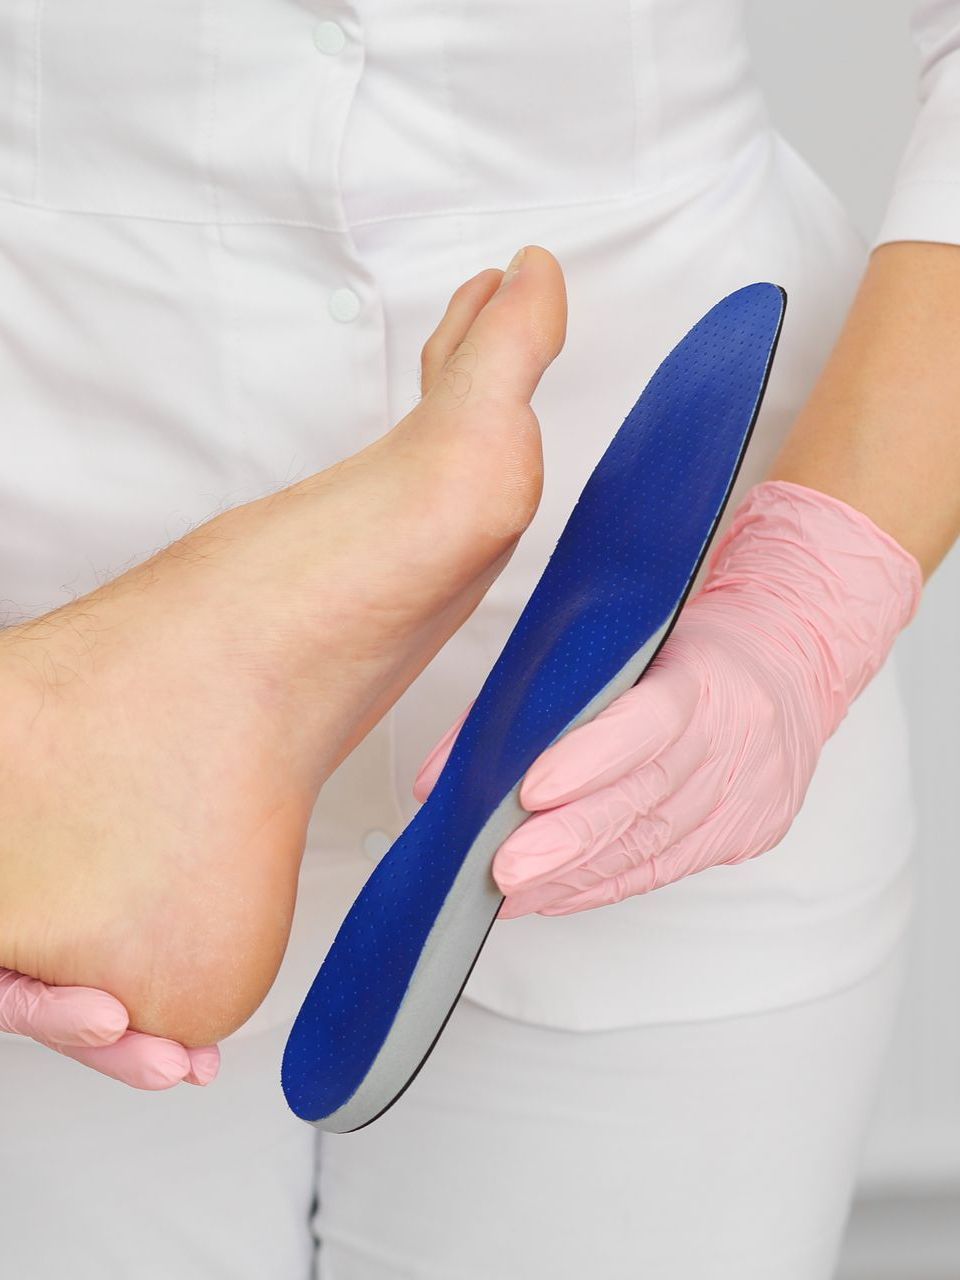 checking orthotics foot insole